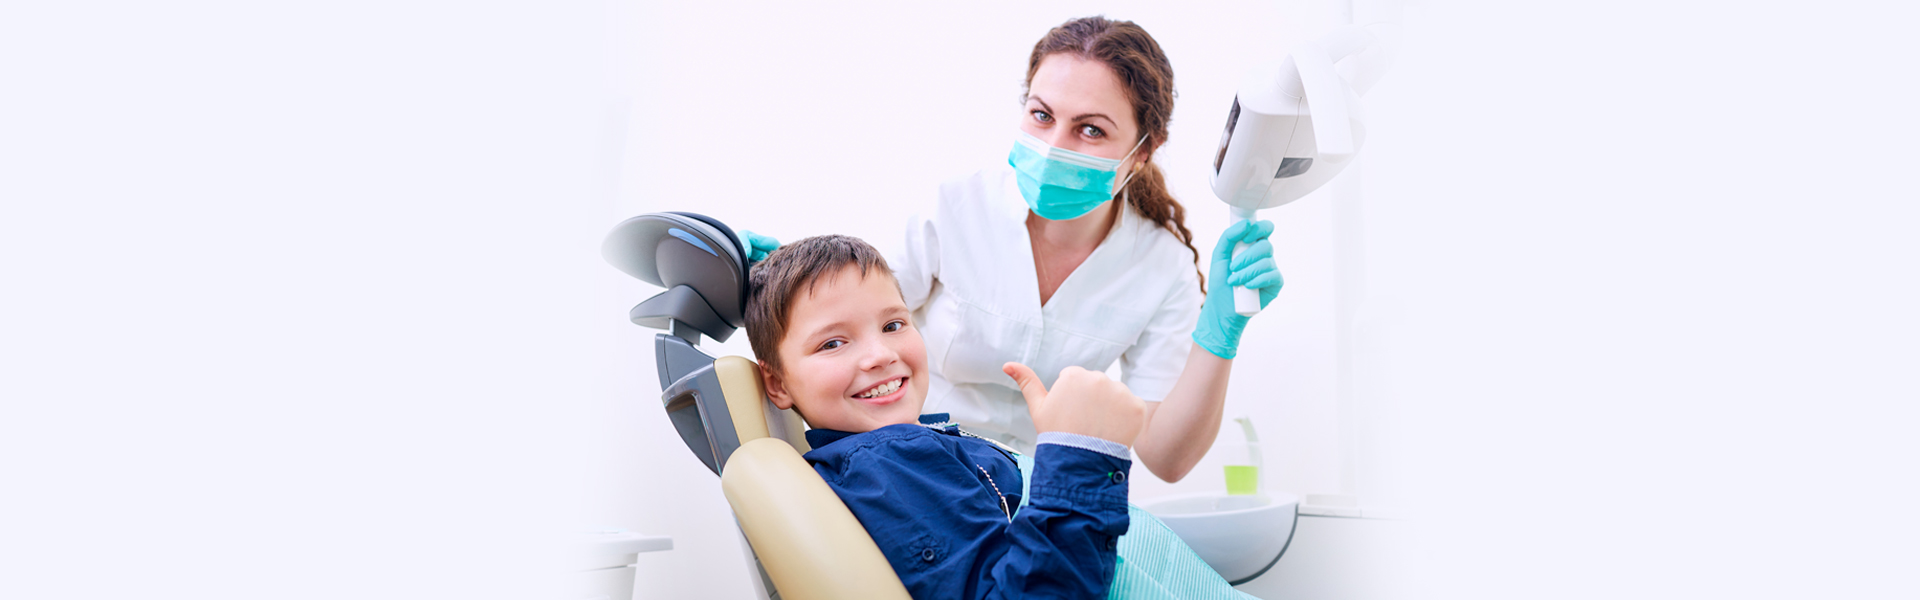 Preventative Care is the Best Way to Make Sure Your Child’s Teeth Are Healthy